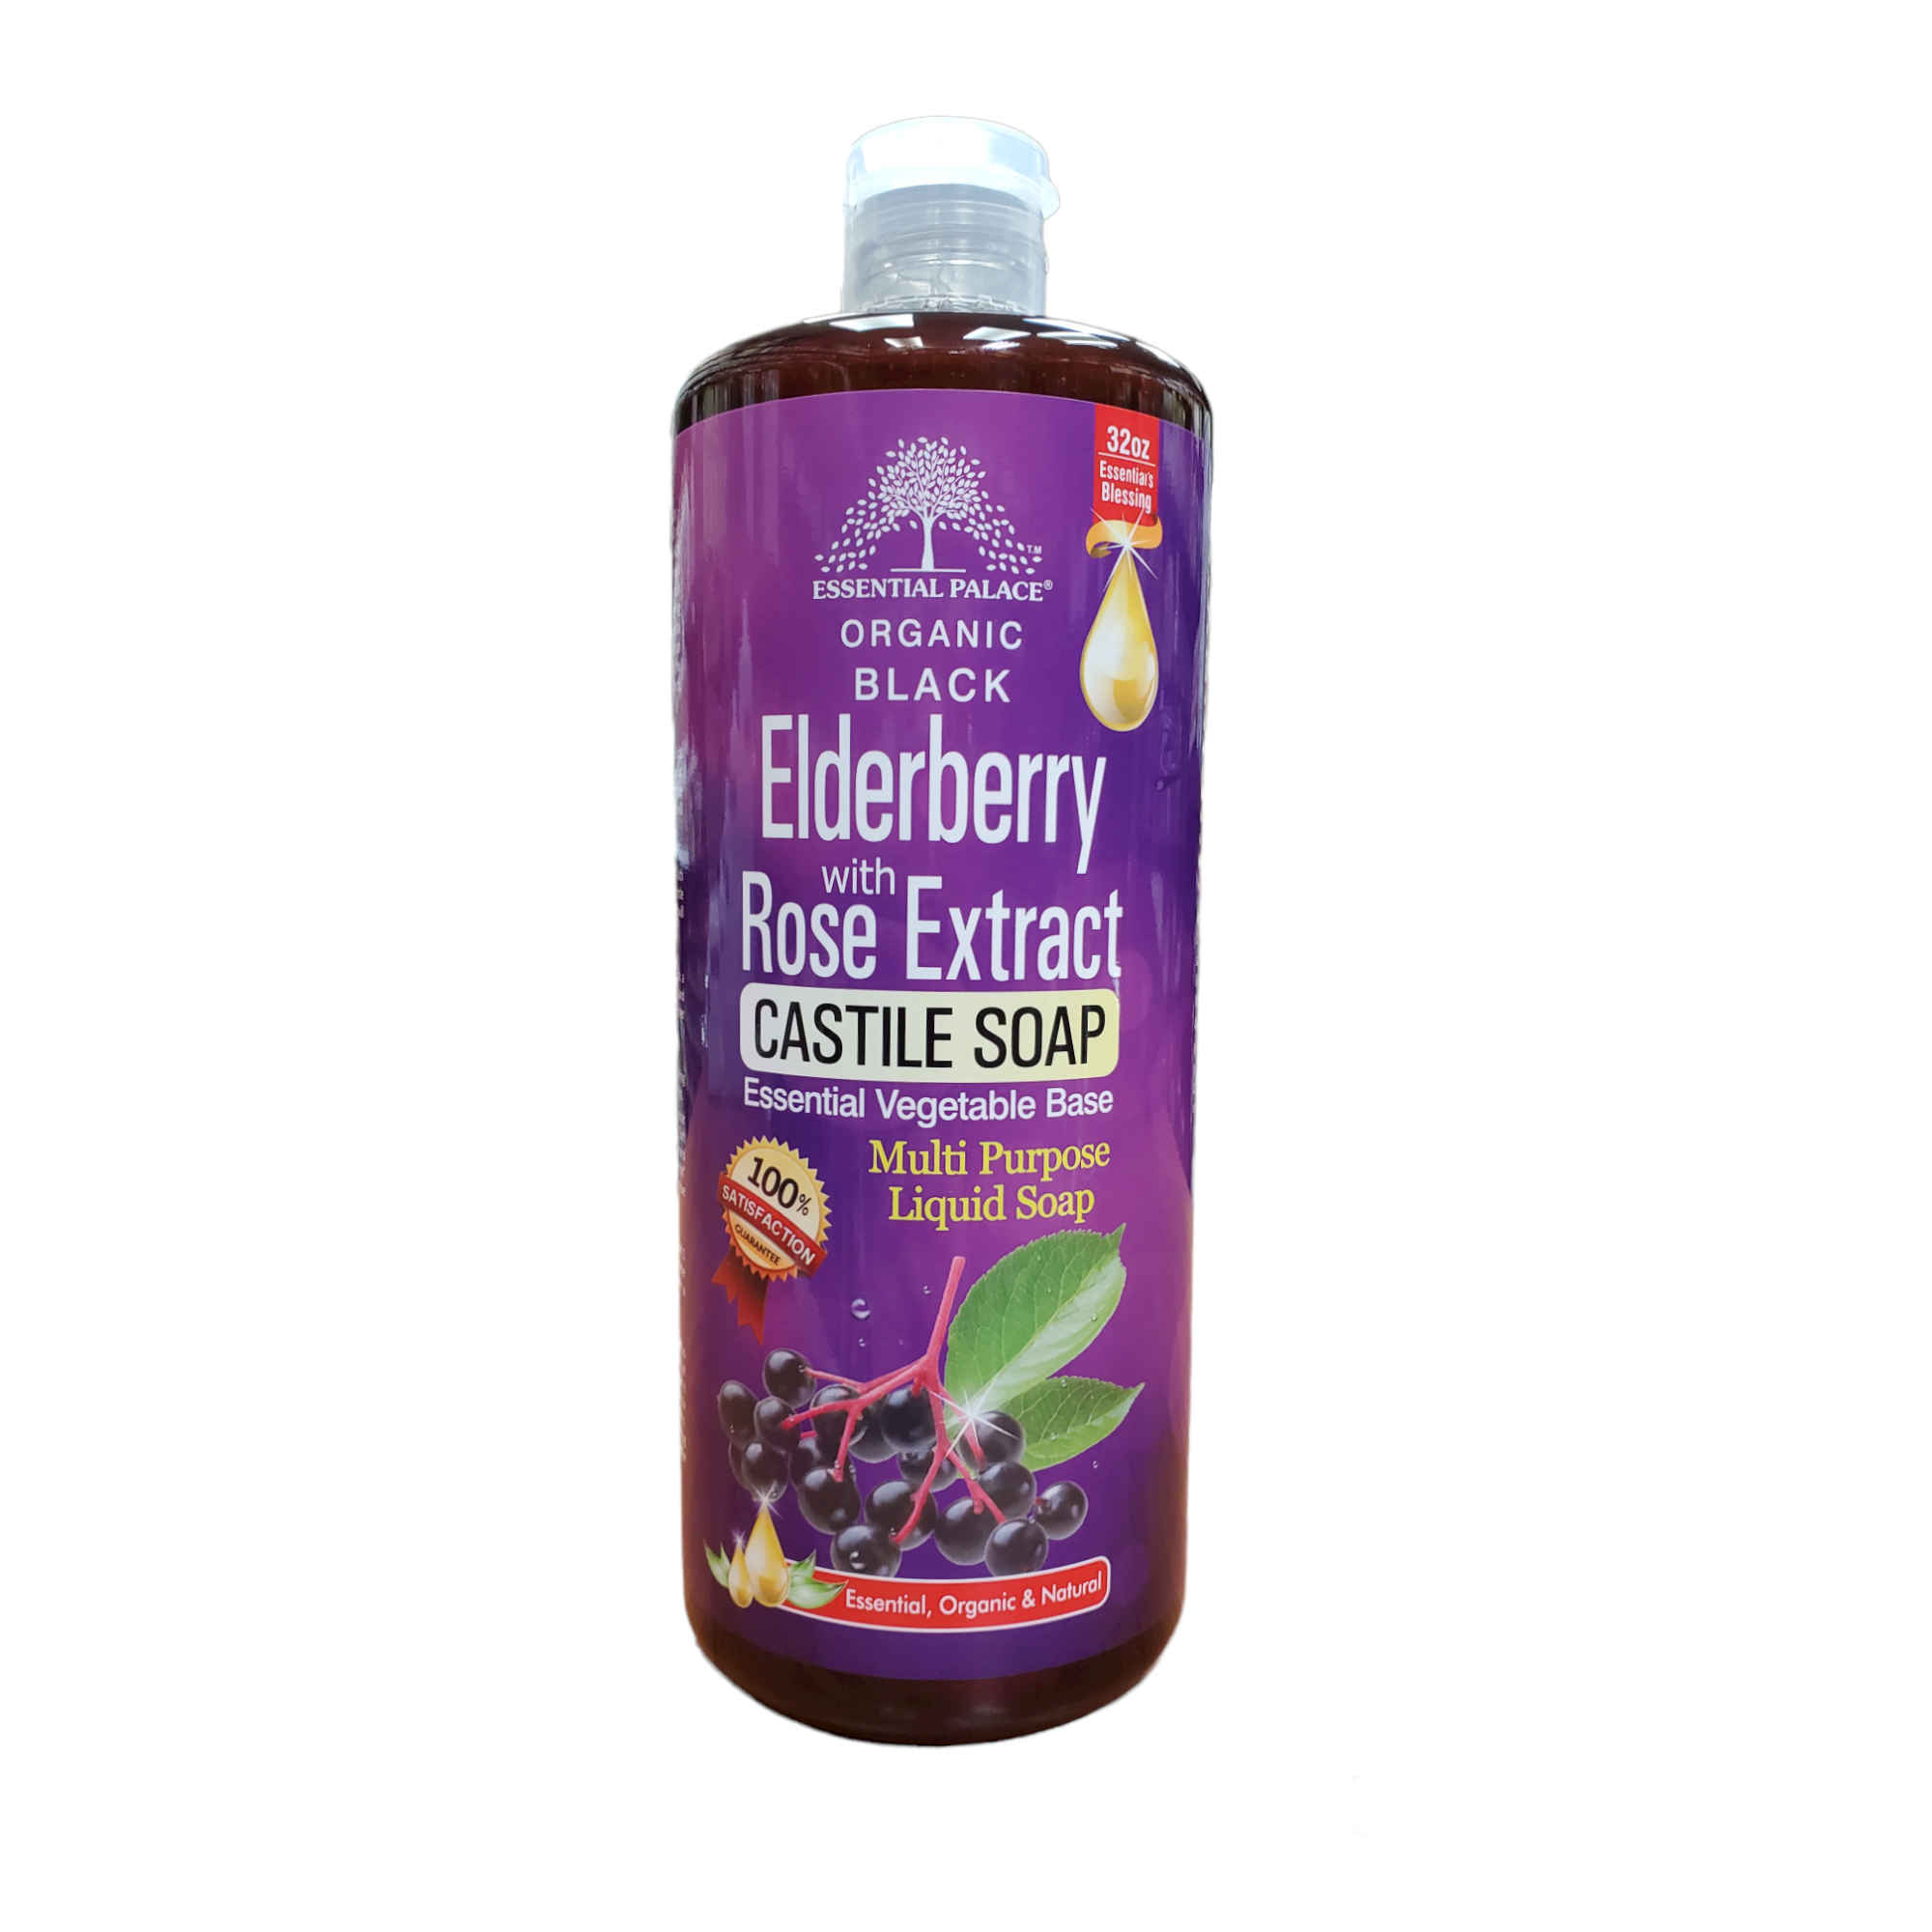 Essential Palace Black Elderberry with Rose Extract Castile Soap 32 OZ Front